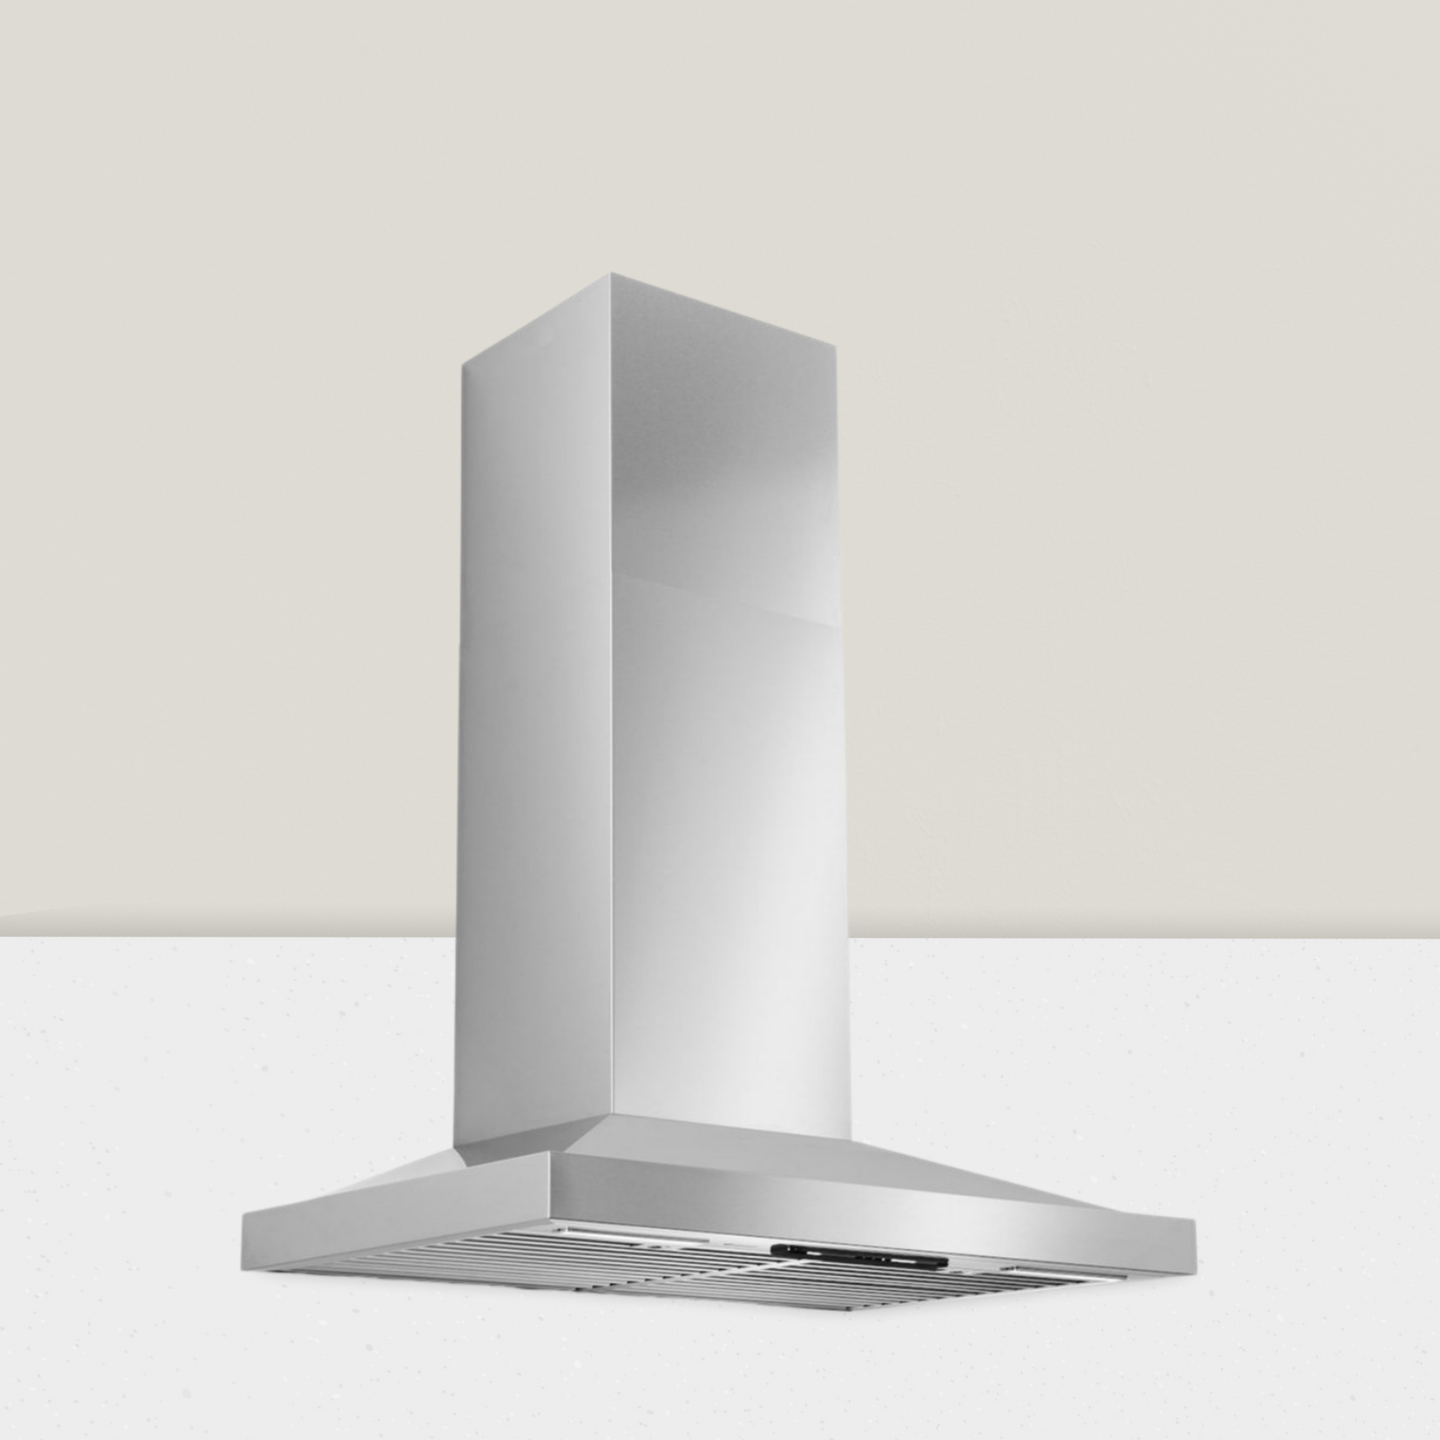 30-36 Inch Wall Mount Chimney Hood w/ SmartSense® and Voice Control - WCS13